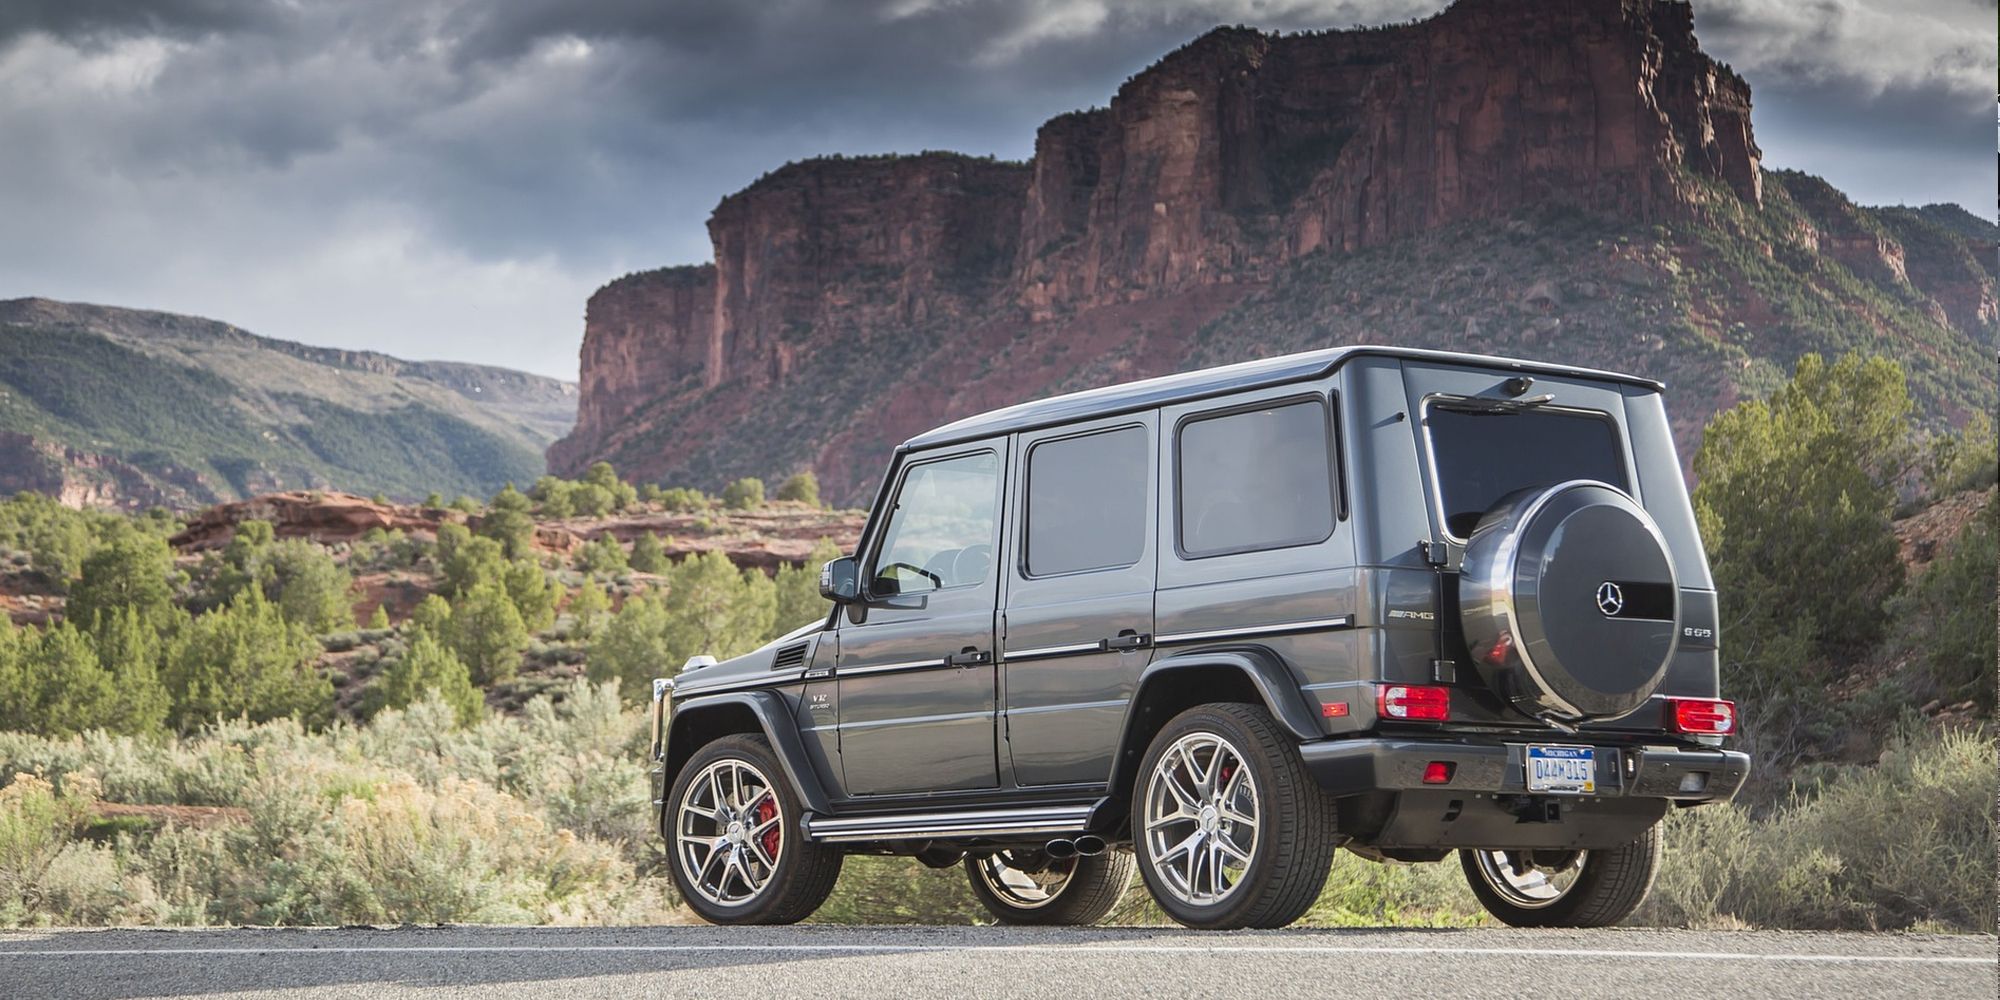 Black G65 AMG on the road